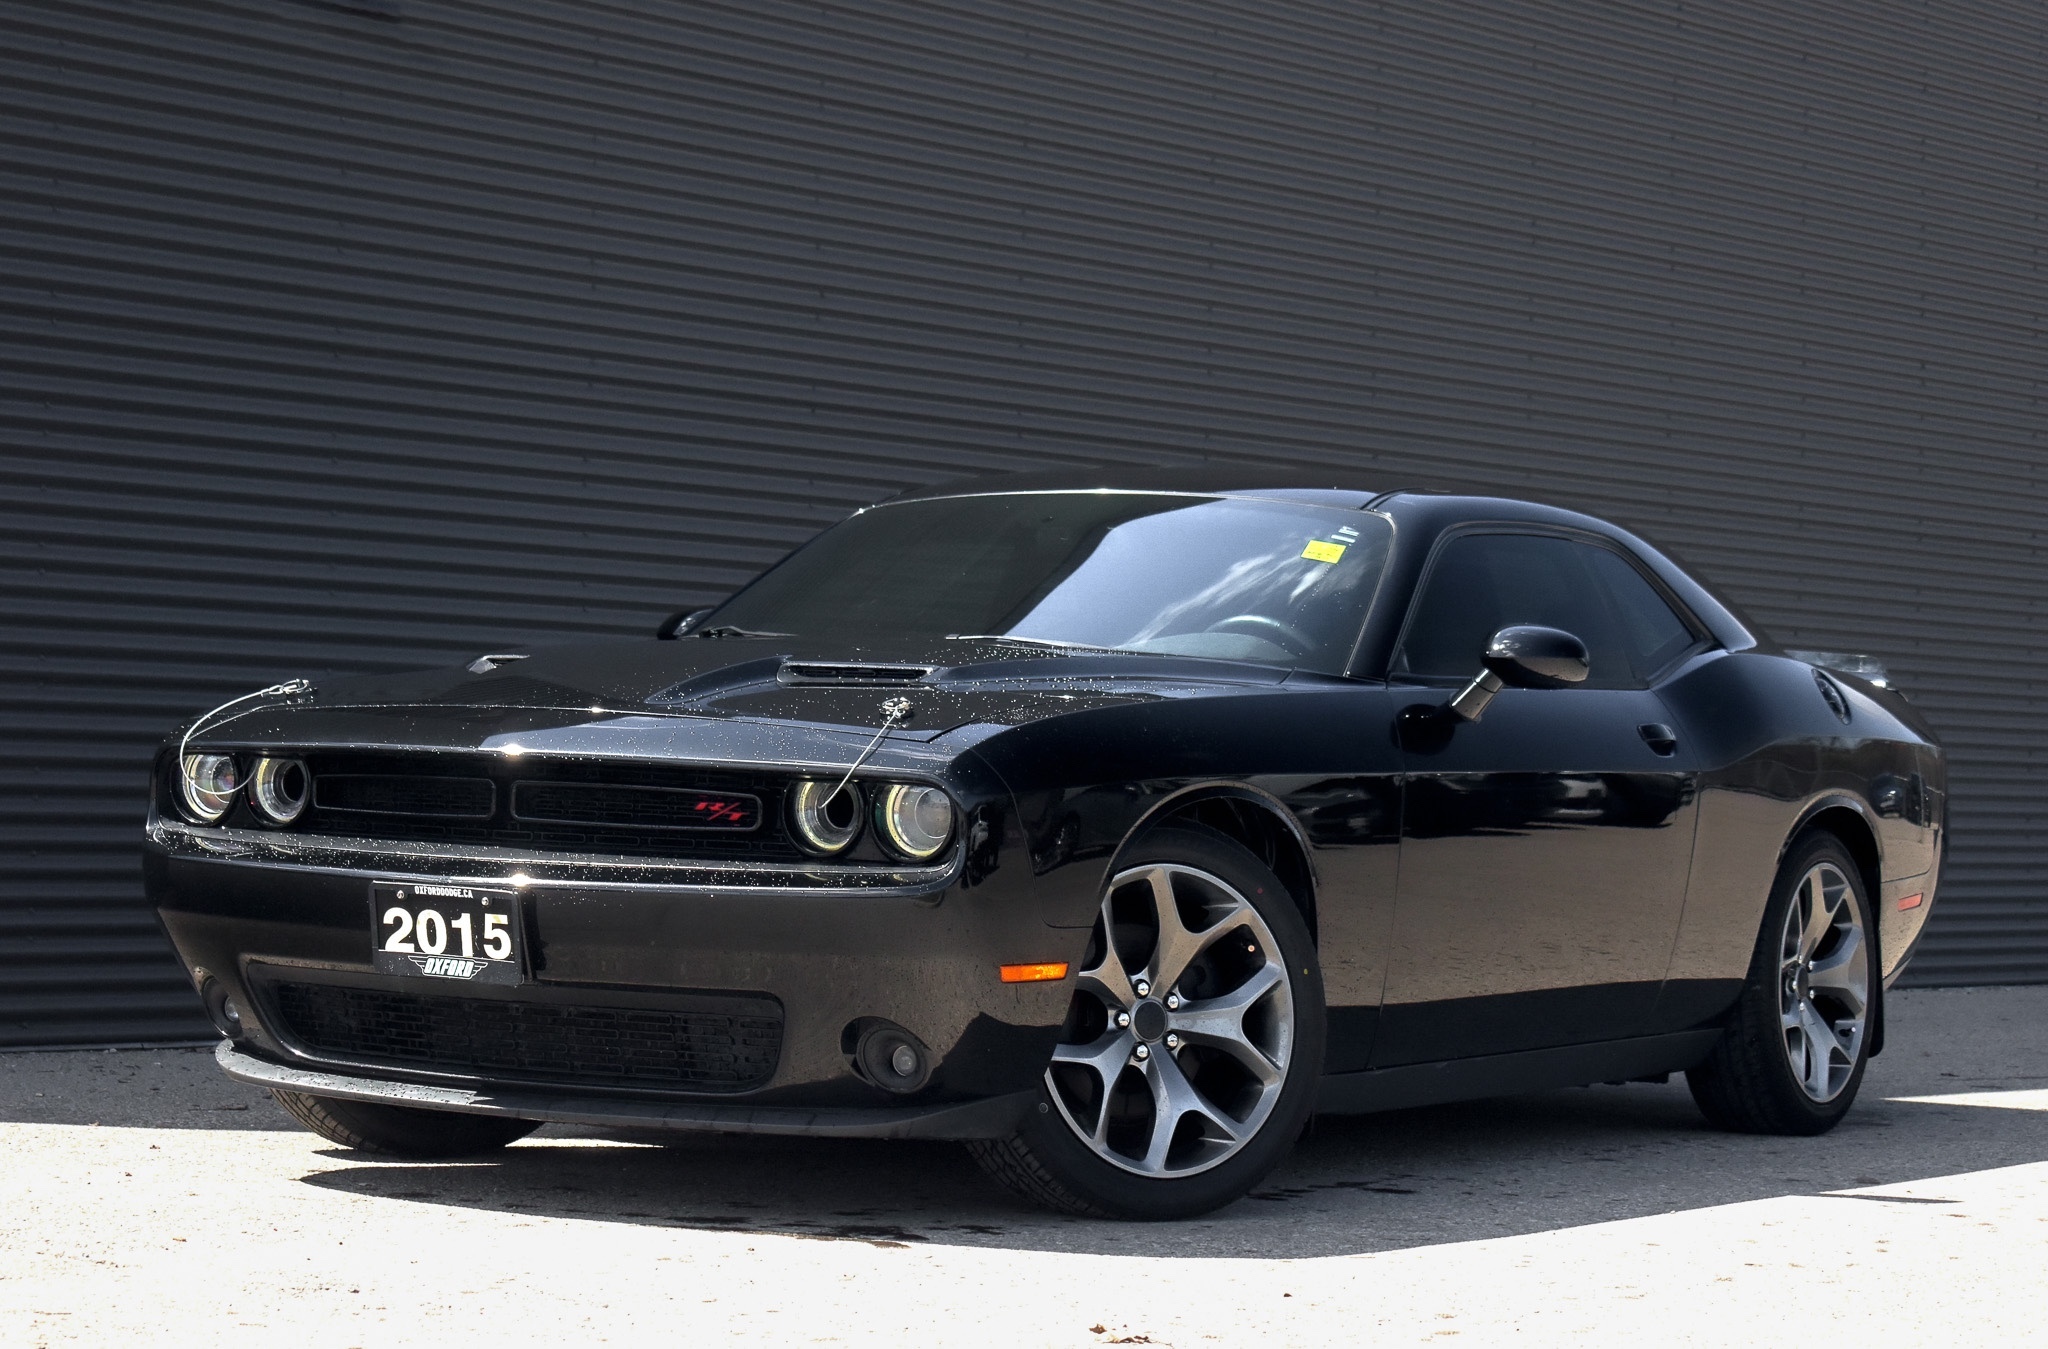 2015 Dodge Challenger SXT Plus or R/T Clean Carfax, Well Maintained, Sum